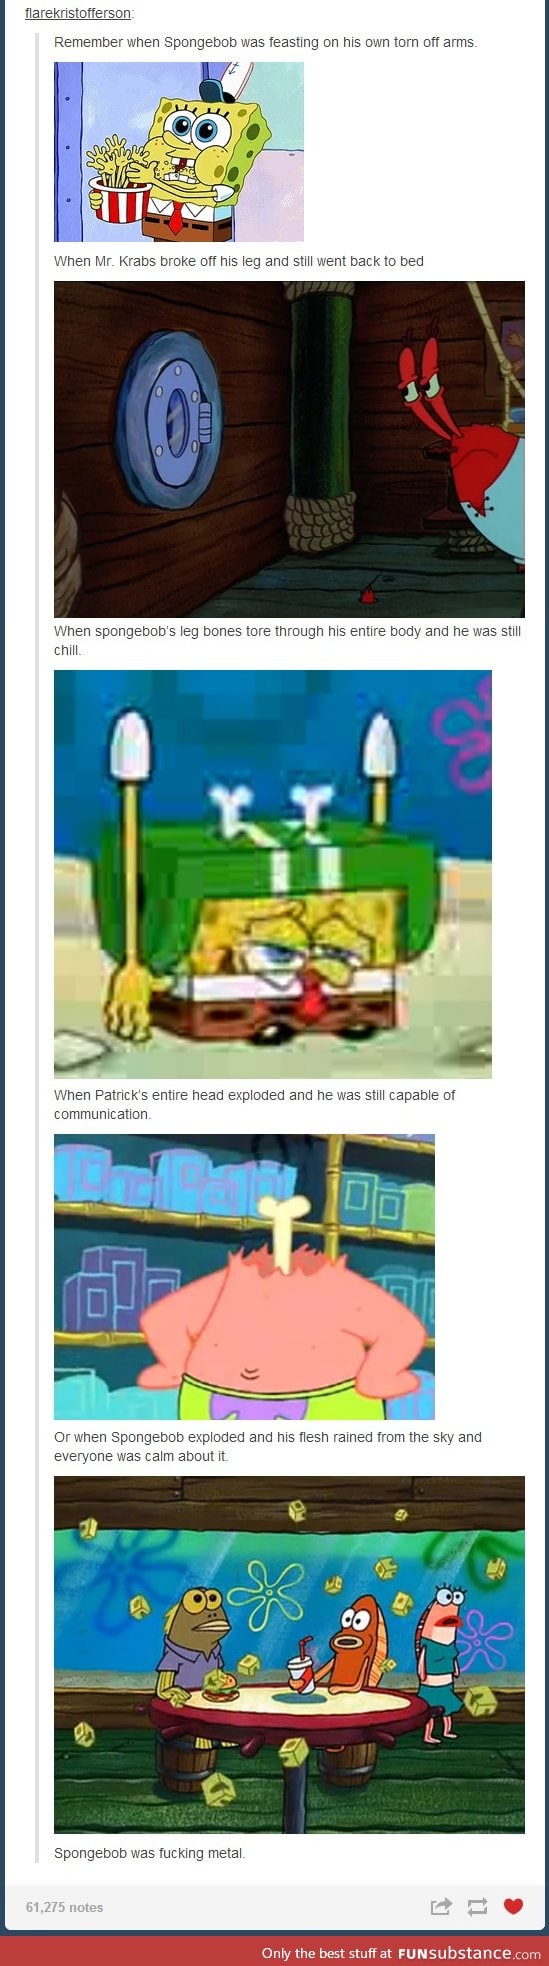 I never really thought of spongebob that way before